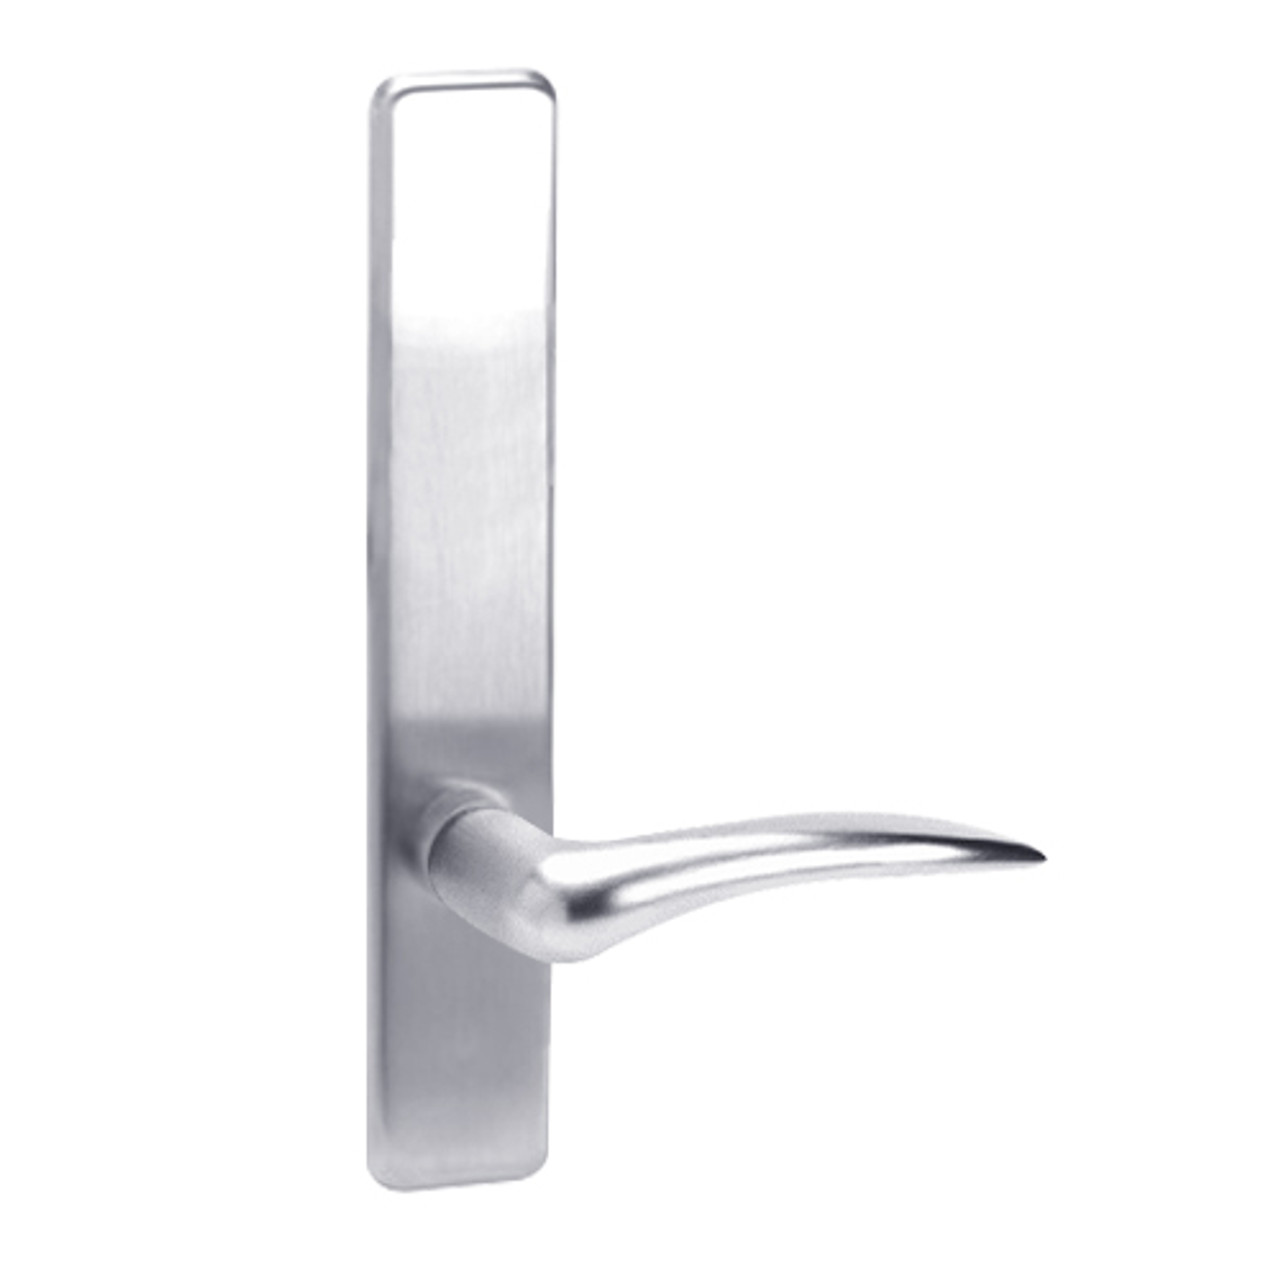 D810-625-LHR Corbin ED4000 Series Exit Device Trim with Passage Dirke Lever in Bright Chrome Finish